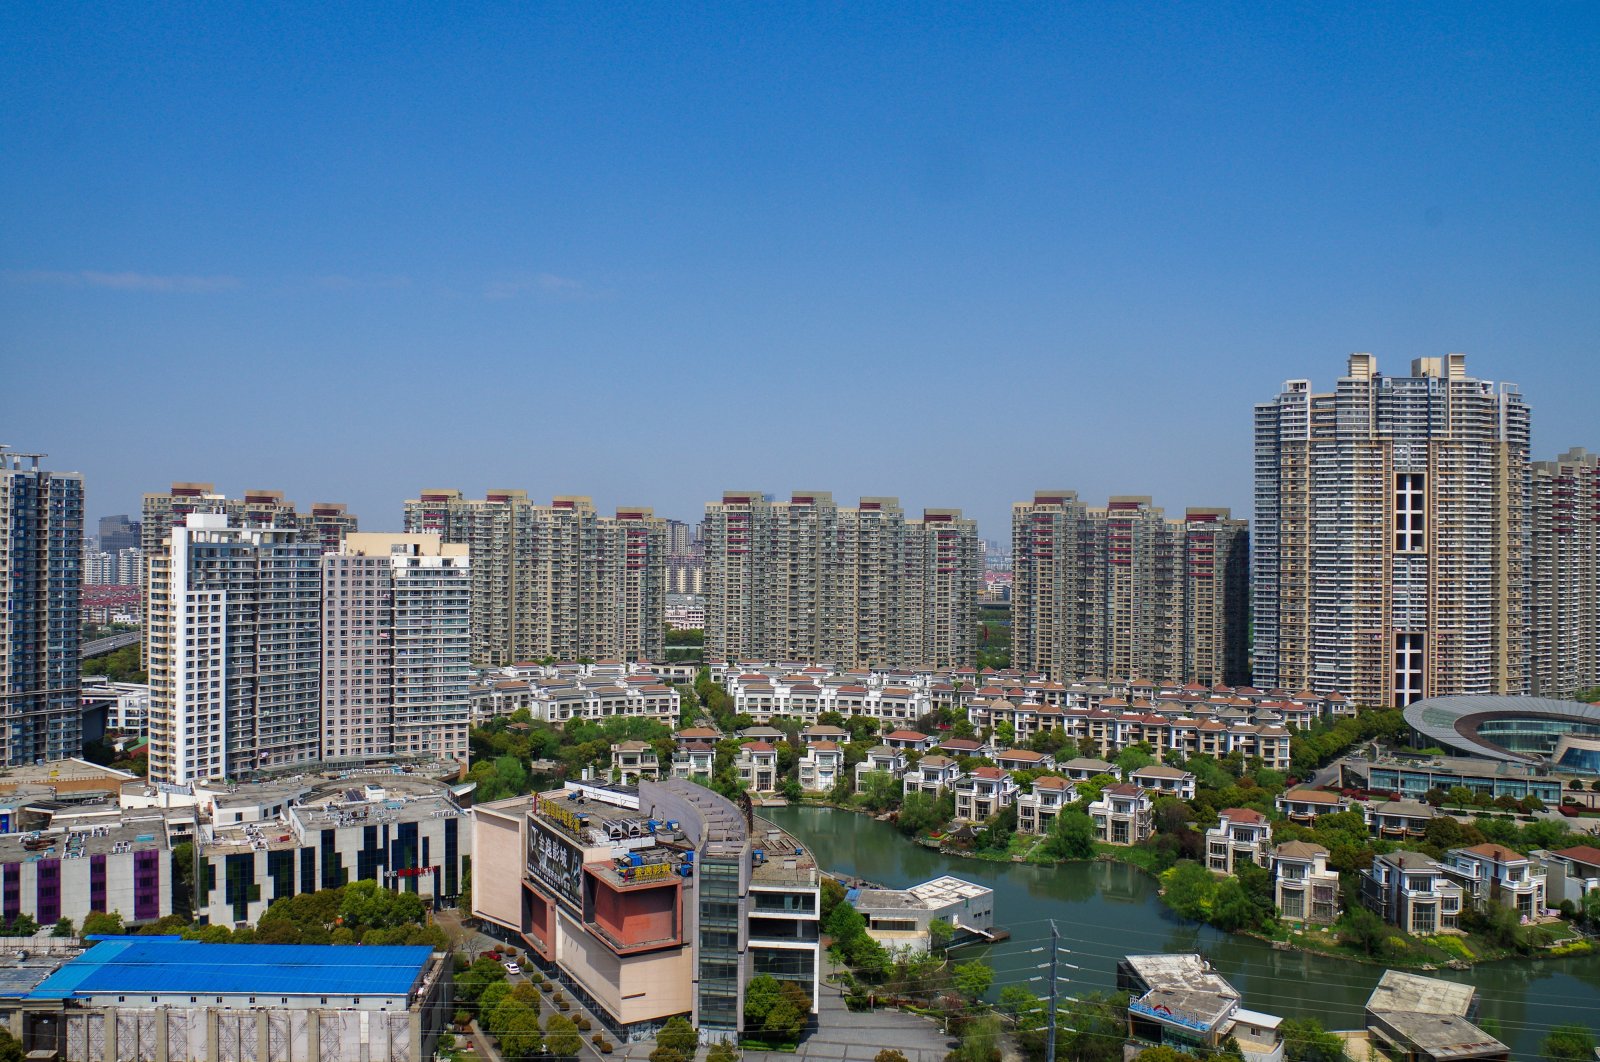 Shimao Group commercial residential building in the city of Kunshan in southeastern Jiangsu province, China, April 4, 2016. (Shutterstock Photo) 